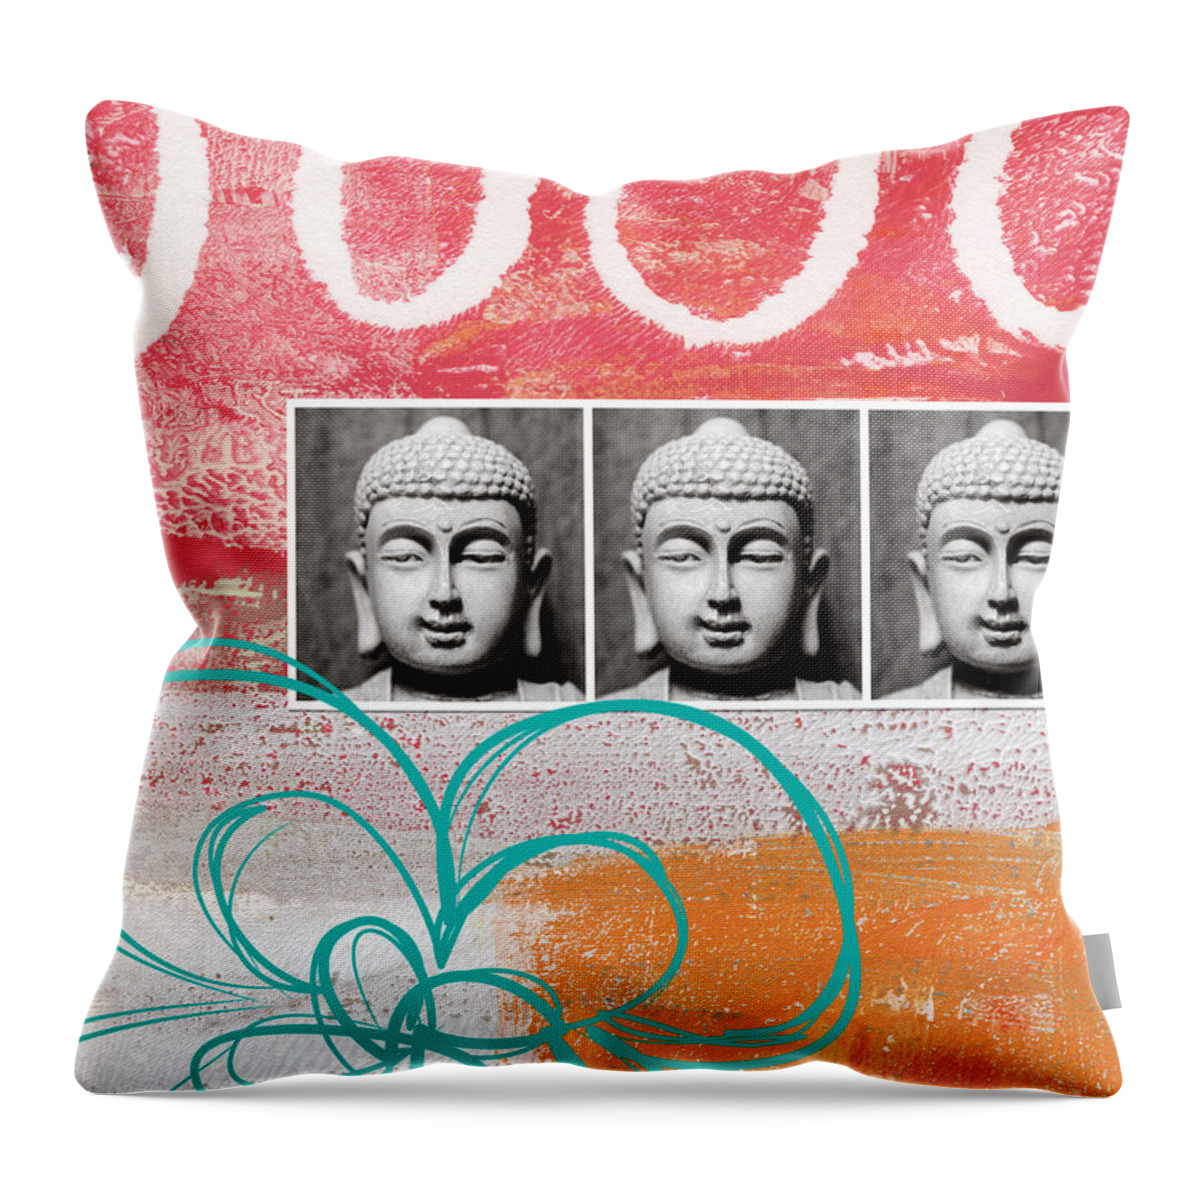 Abstract Throw Pillow featuring the painting Buddha With Flower by Linda Woods